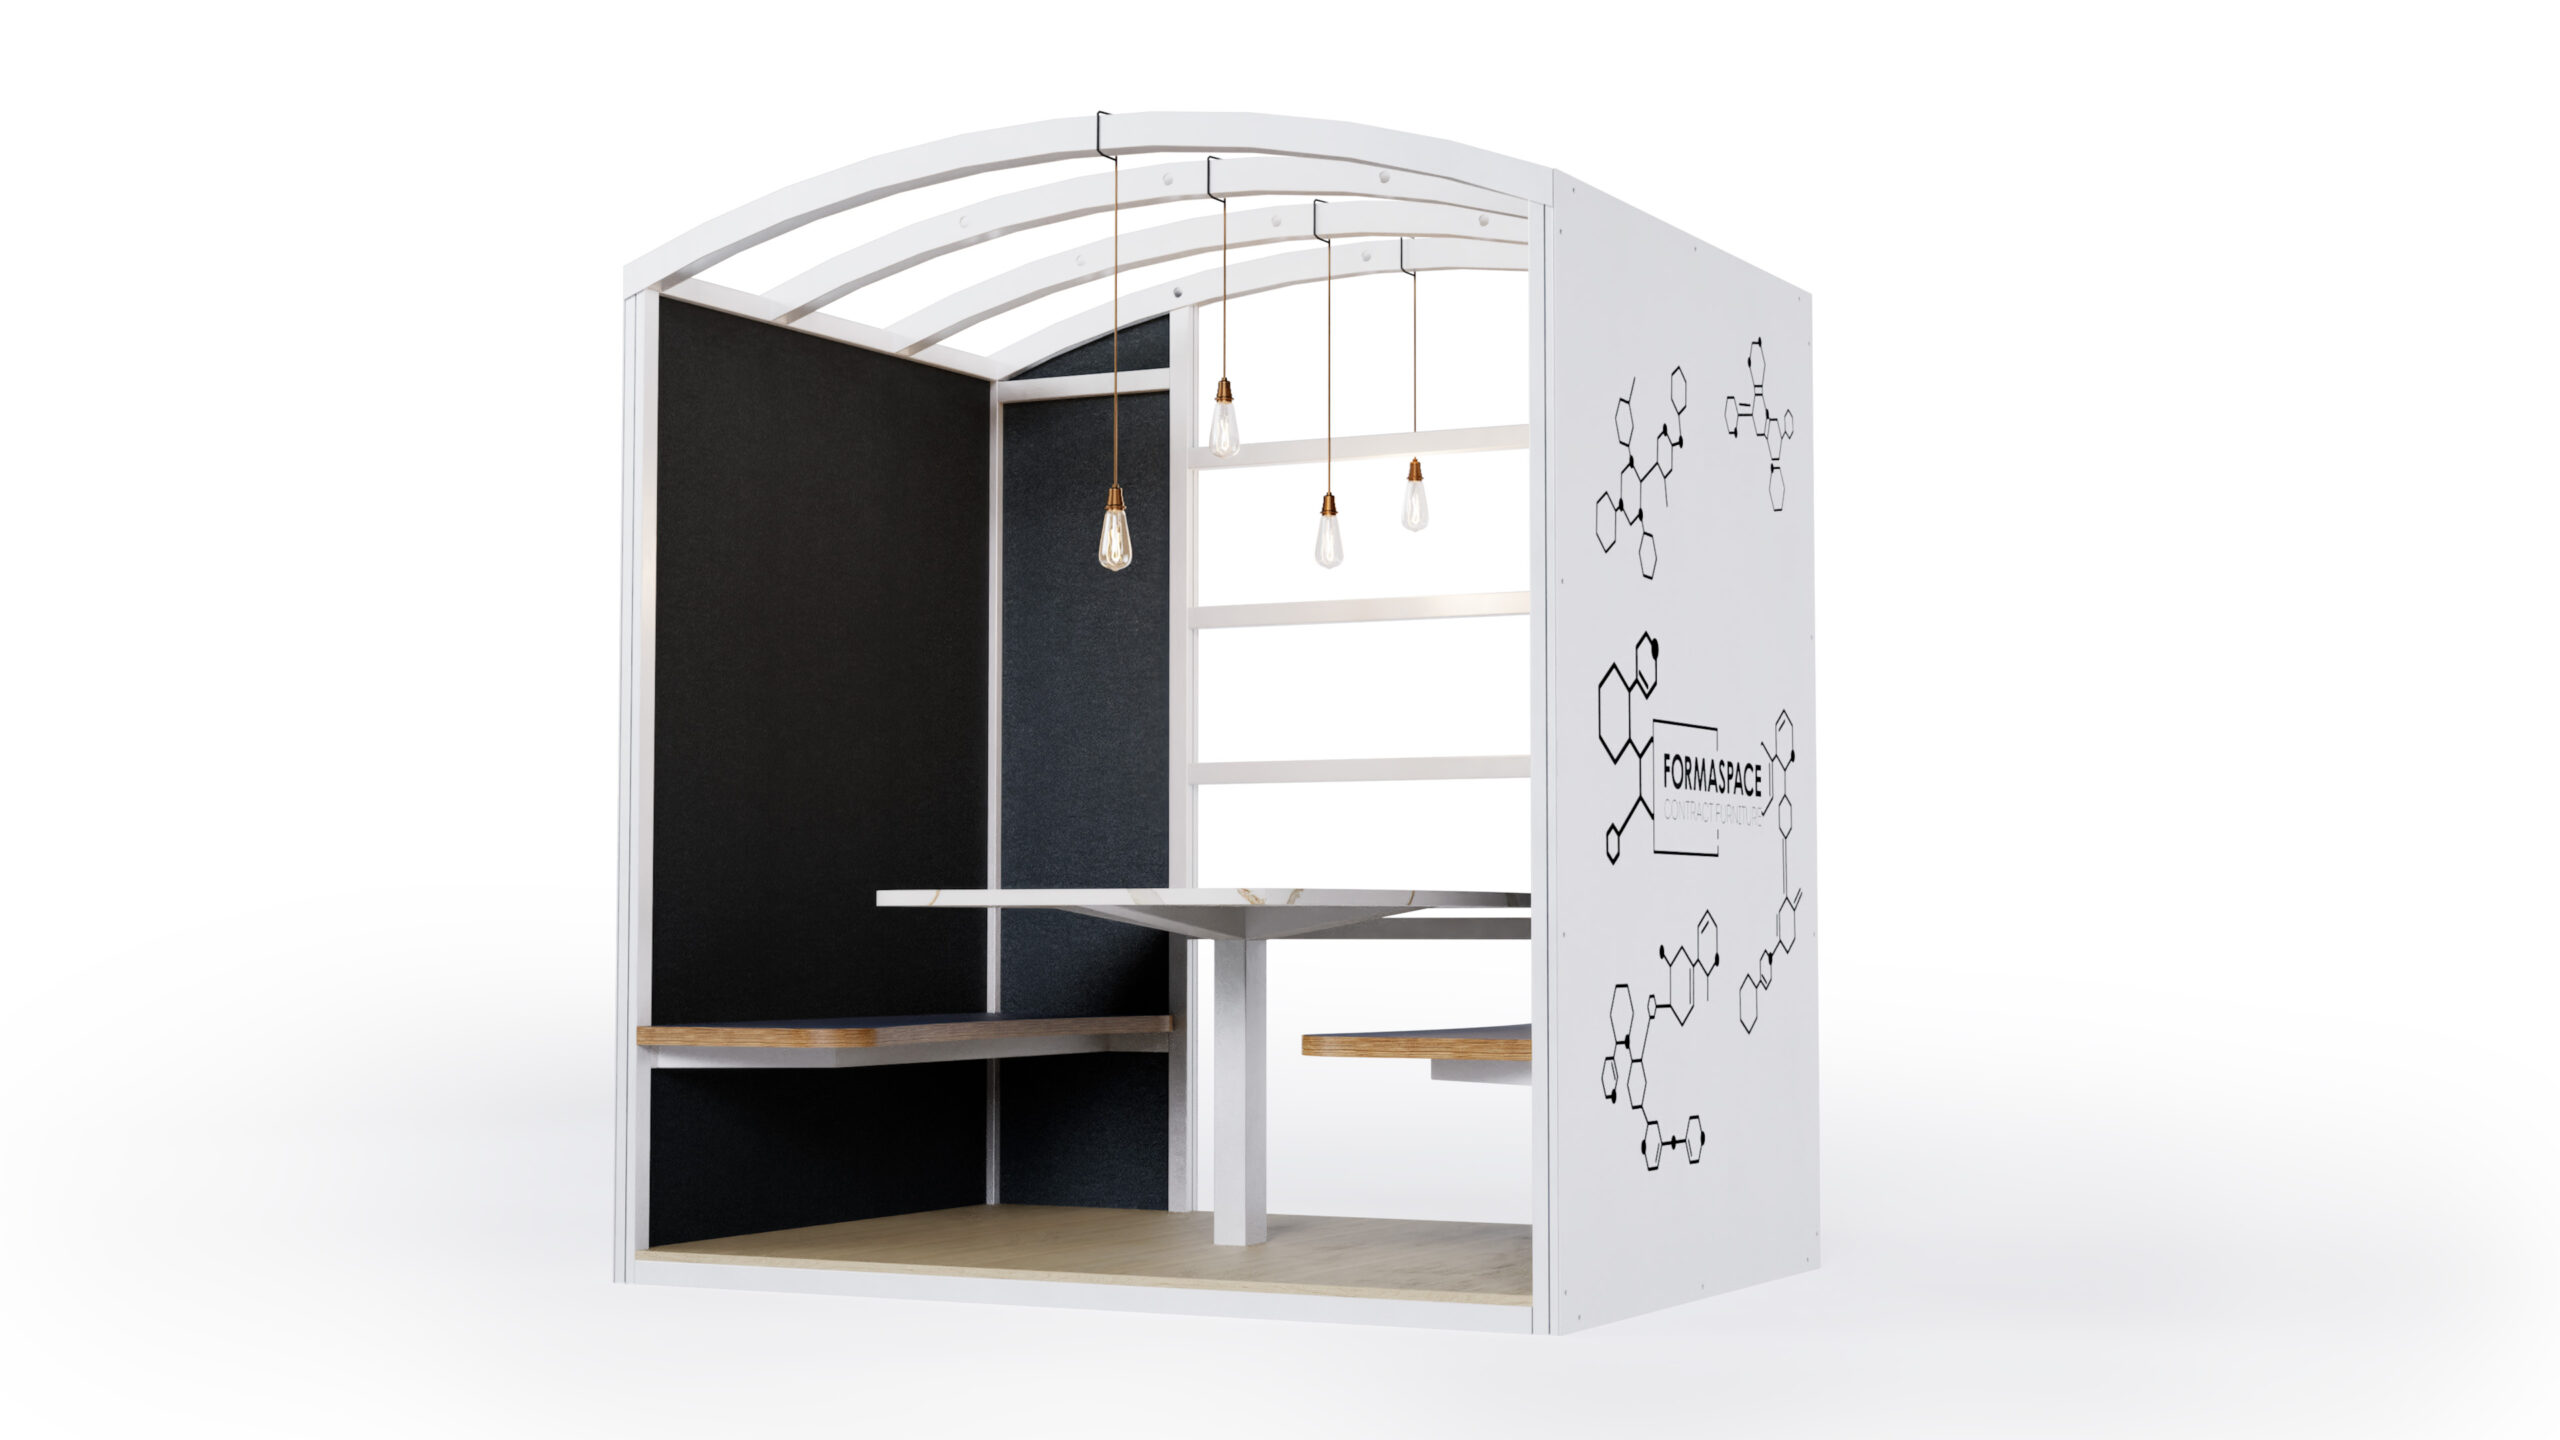 formaspace collaboration pod with a custom molecular graphic